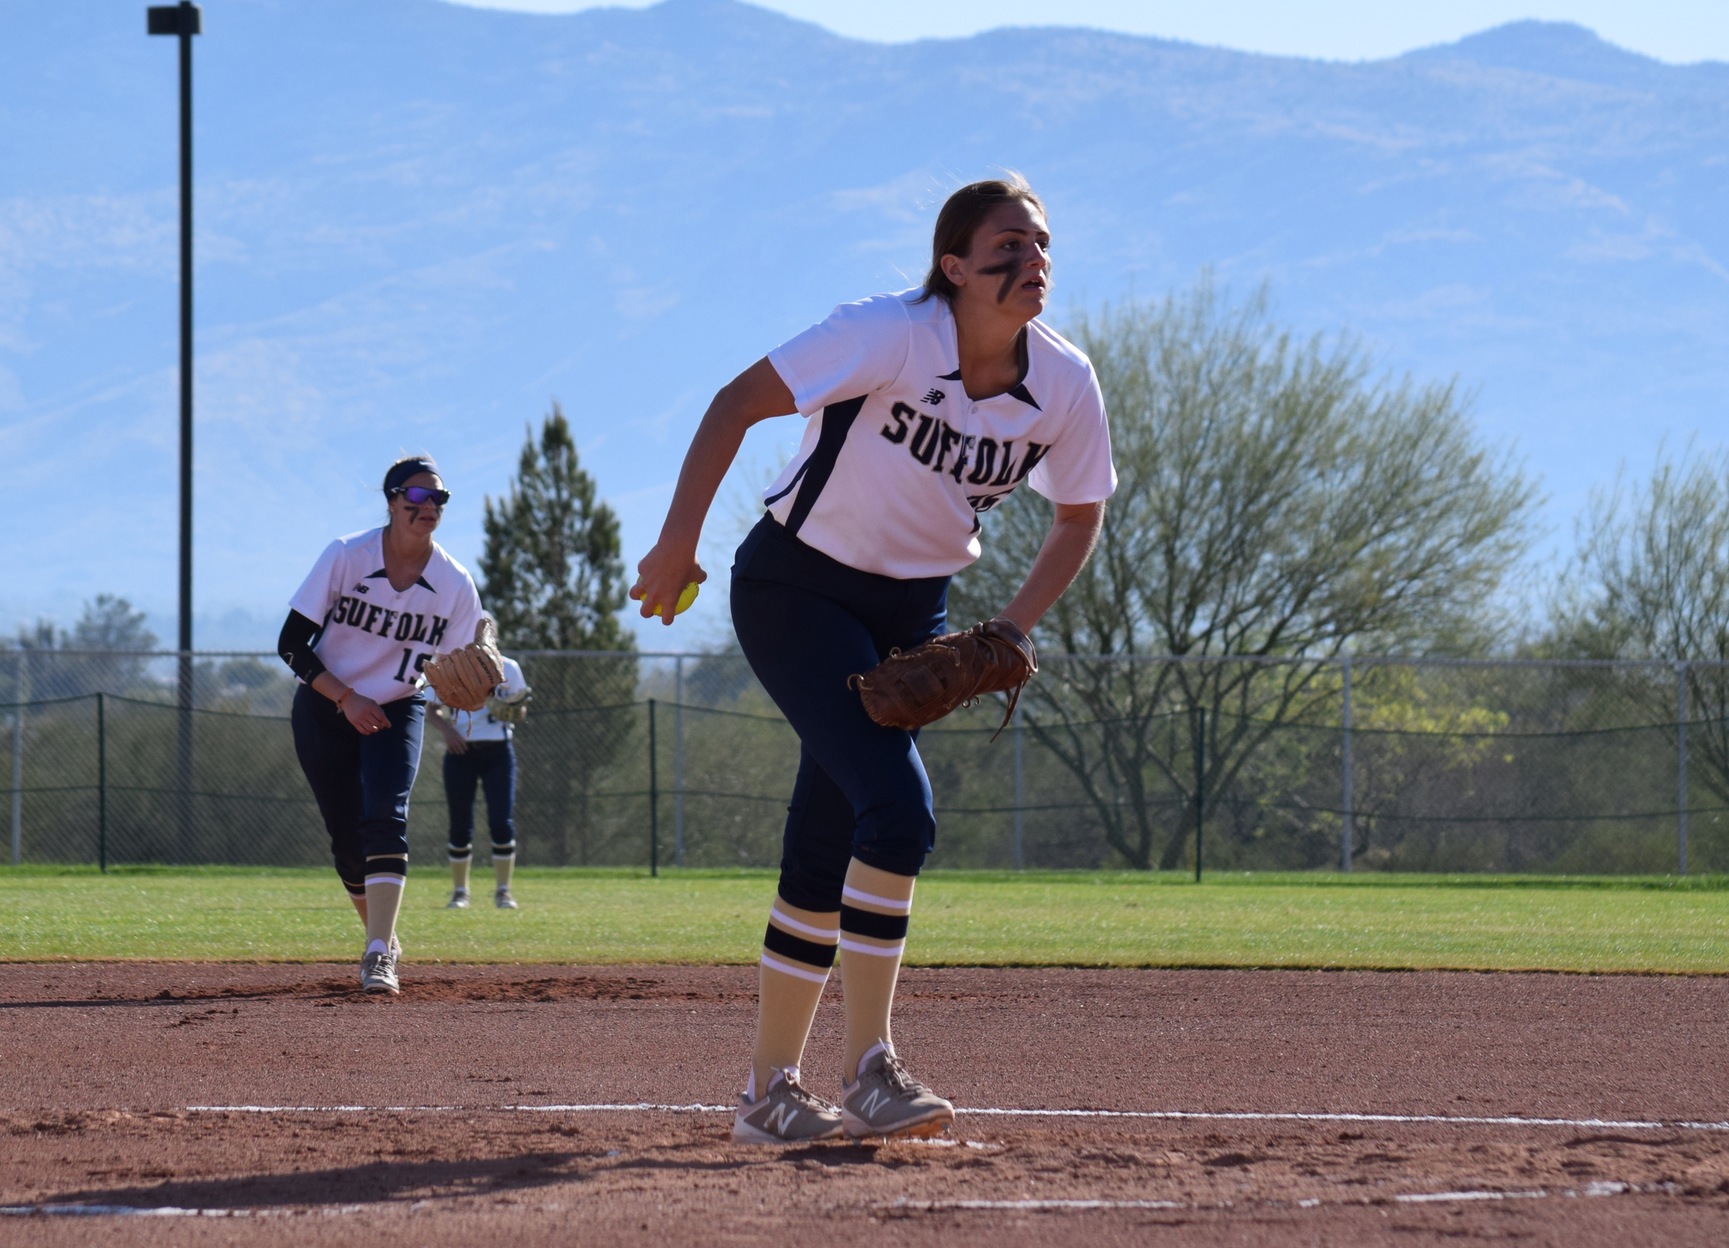 Softball Falls to Emerson, 11-9, in Two Extra Innings, in Game 1